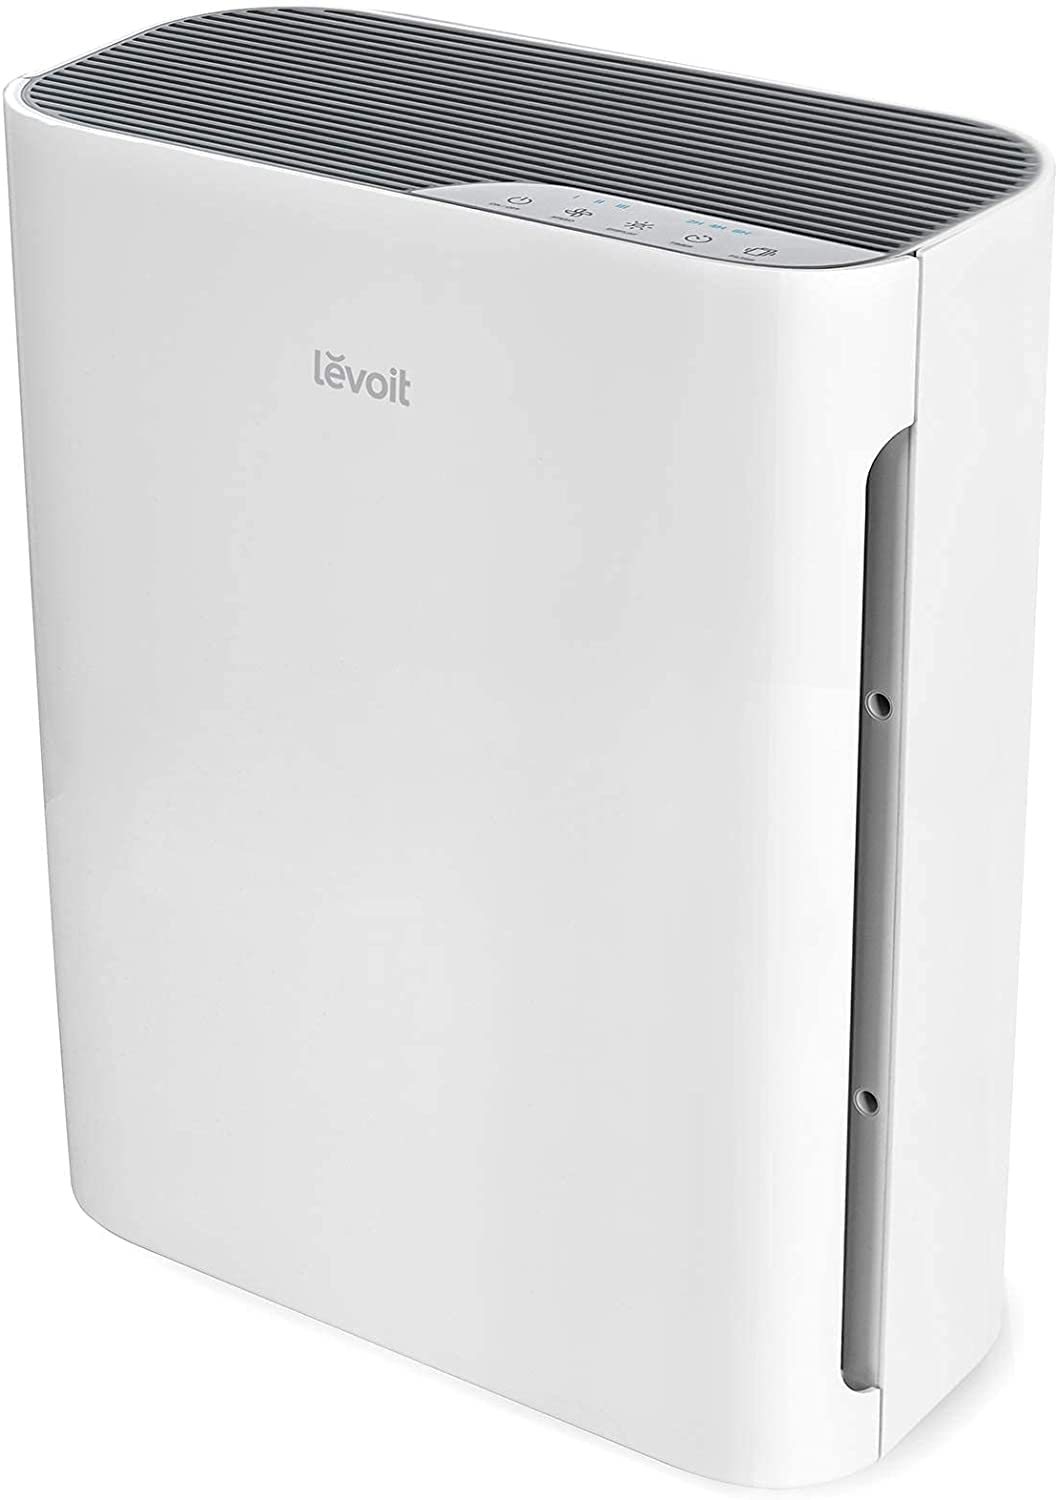 LEVOIT Air Purifiers for Home Large Room, HEPA Filter C...